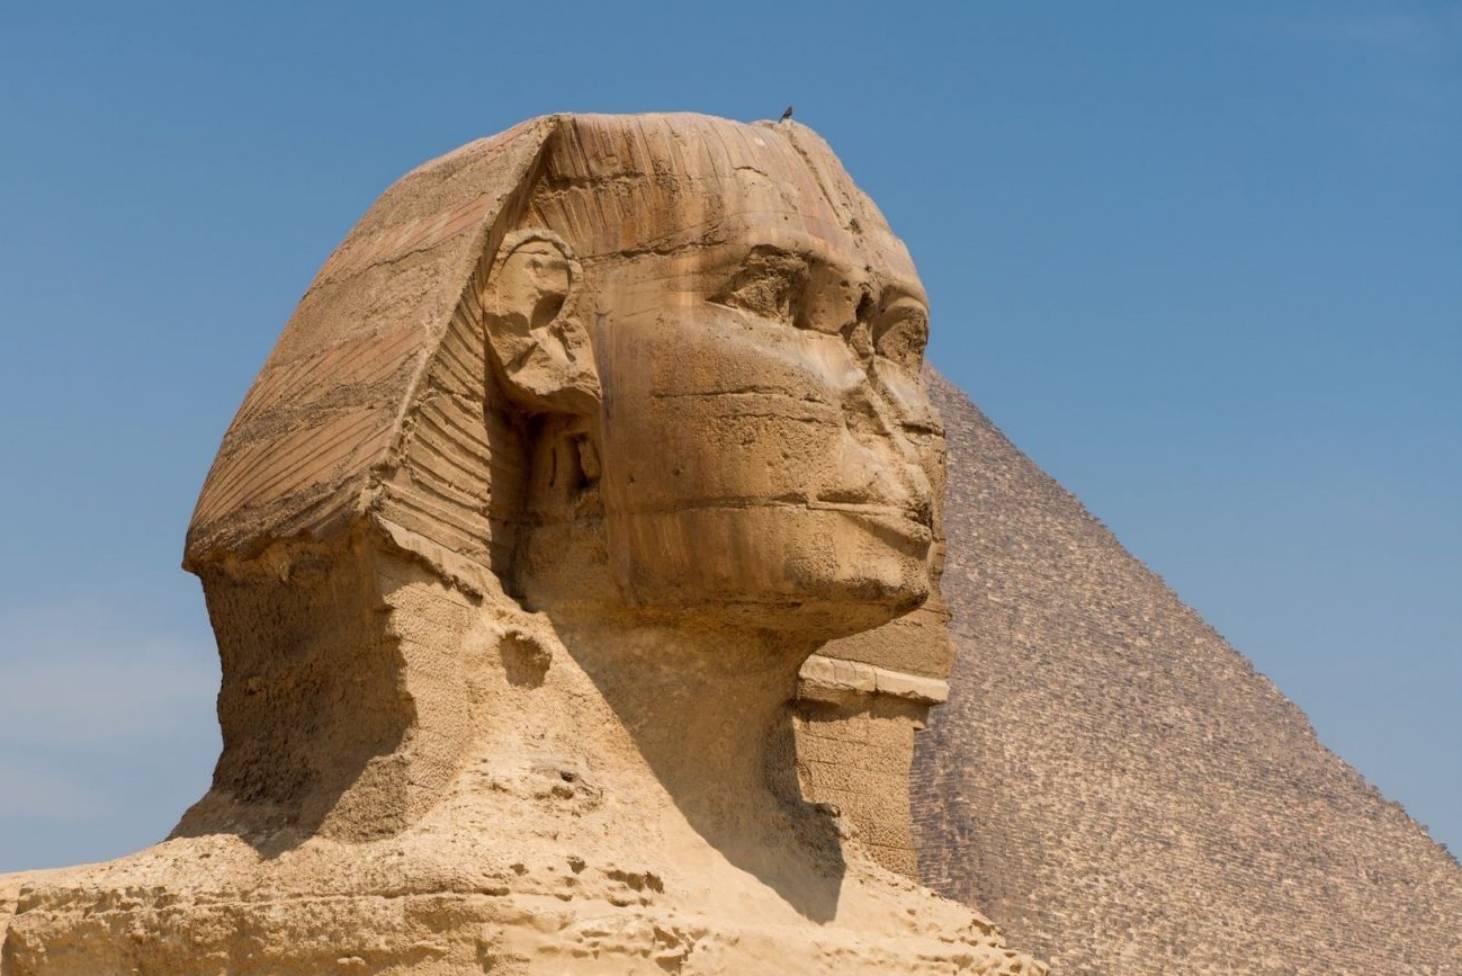 The copycat construction of the Great Sphinx of Giza in Hebei Province